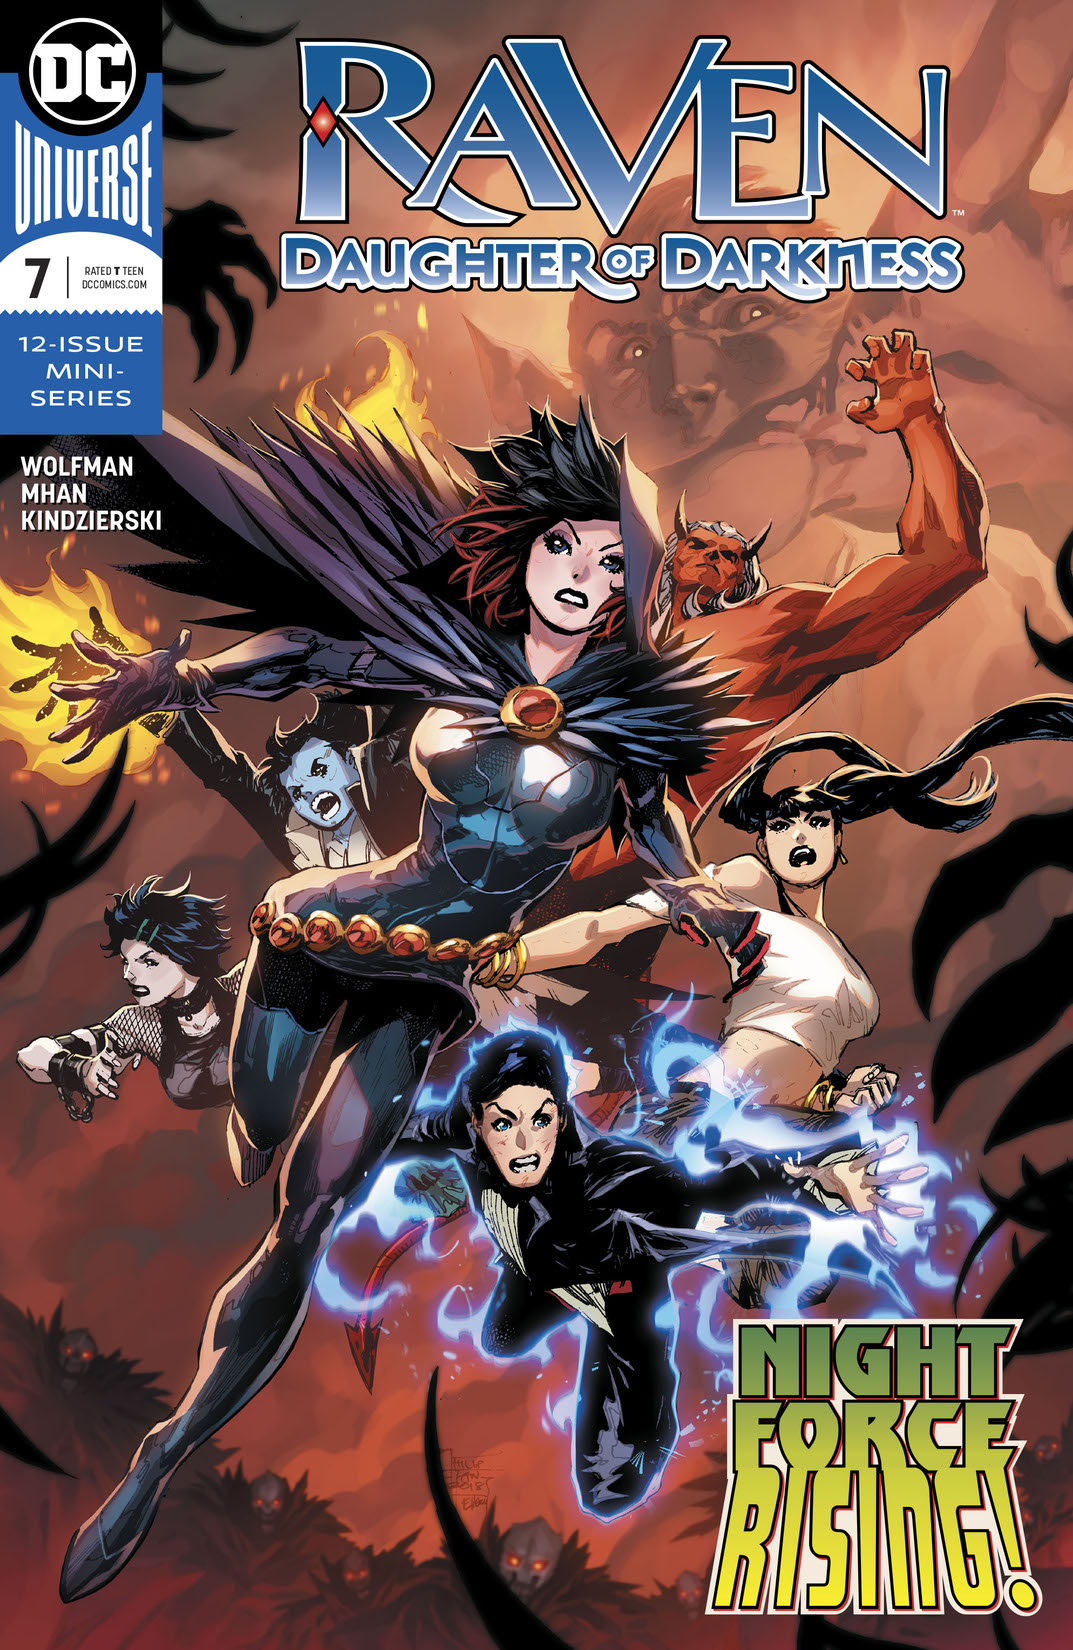 Raven: Daughter of Darkness #7 preview images